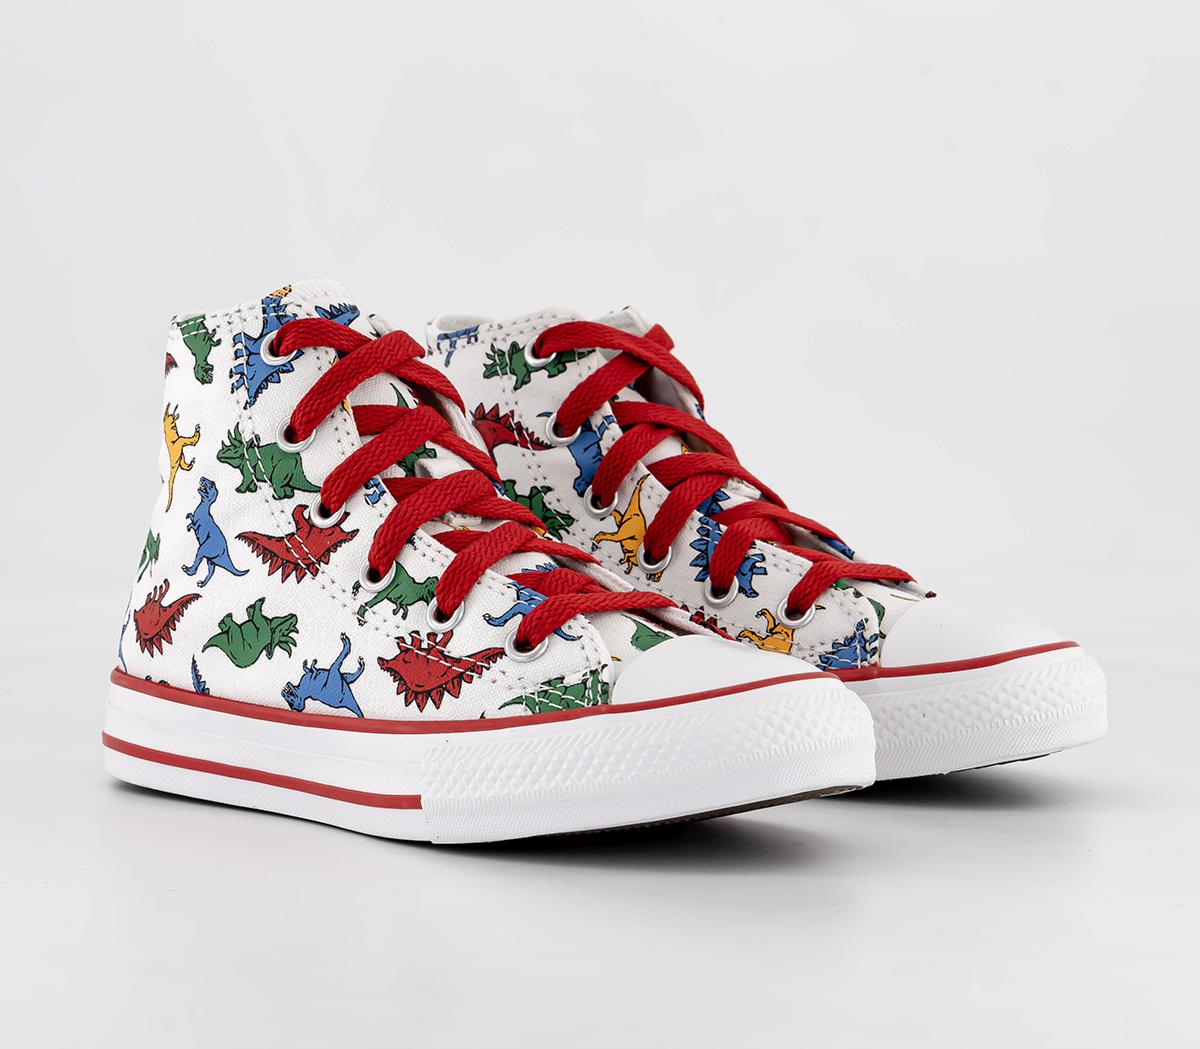 Converse Kids All Star Hi Mid Sizes Trainers White Enamel Red Totally Blue Dino, 2